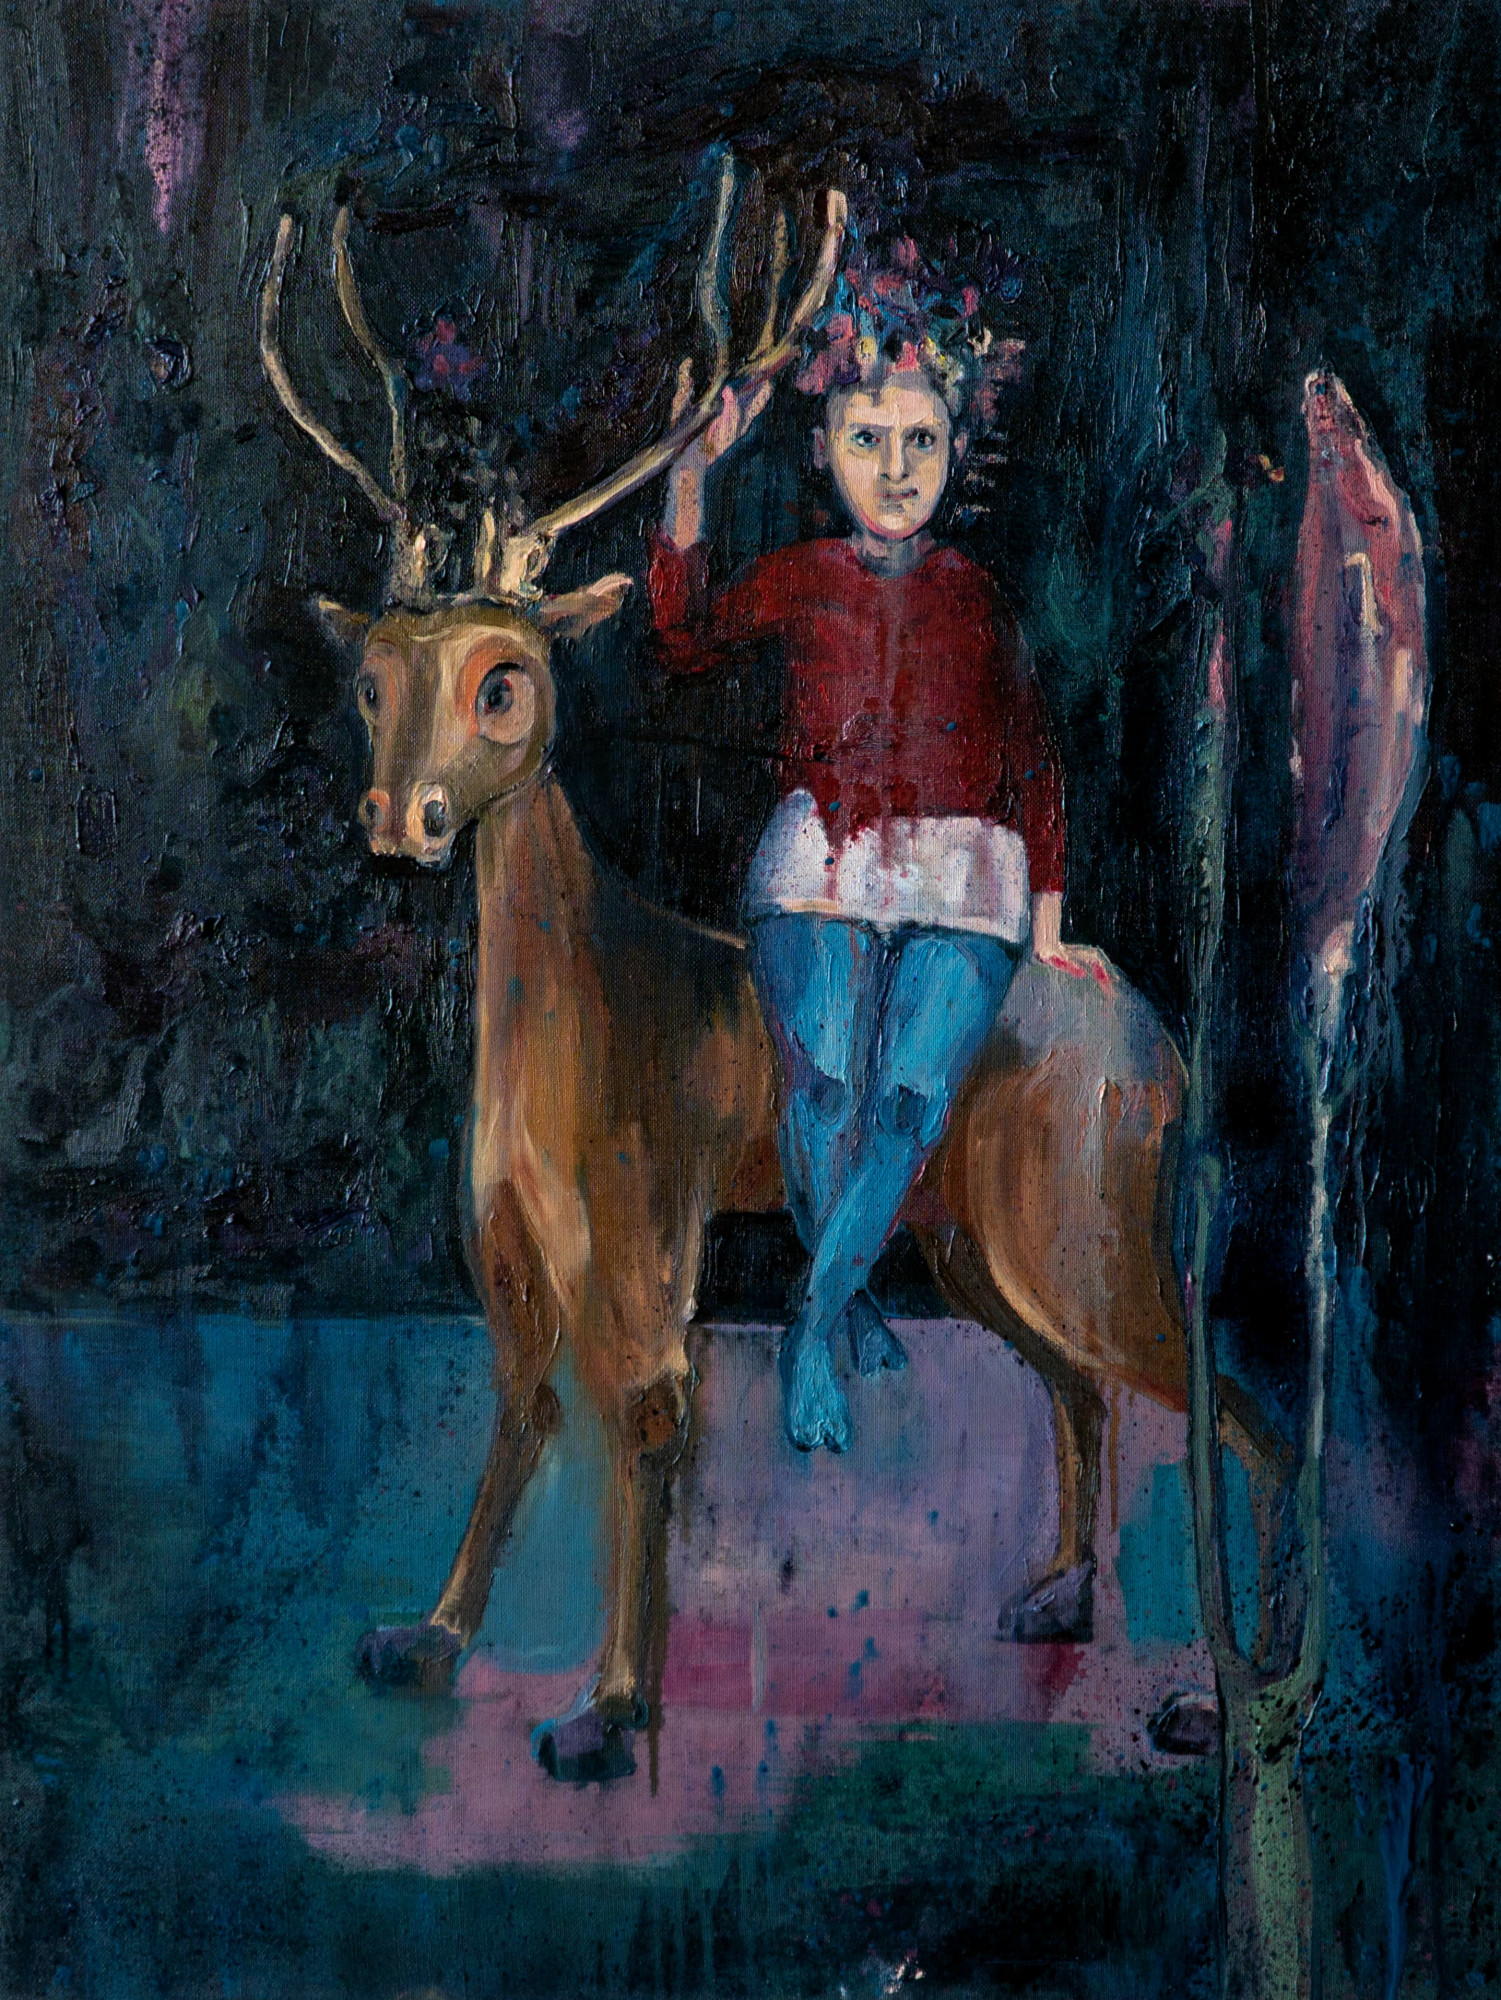 Guest II, 2019. From the Like a Merry-Go-Round in Childhood: Forest Deer series